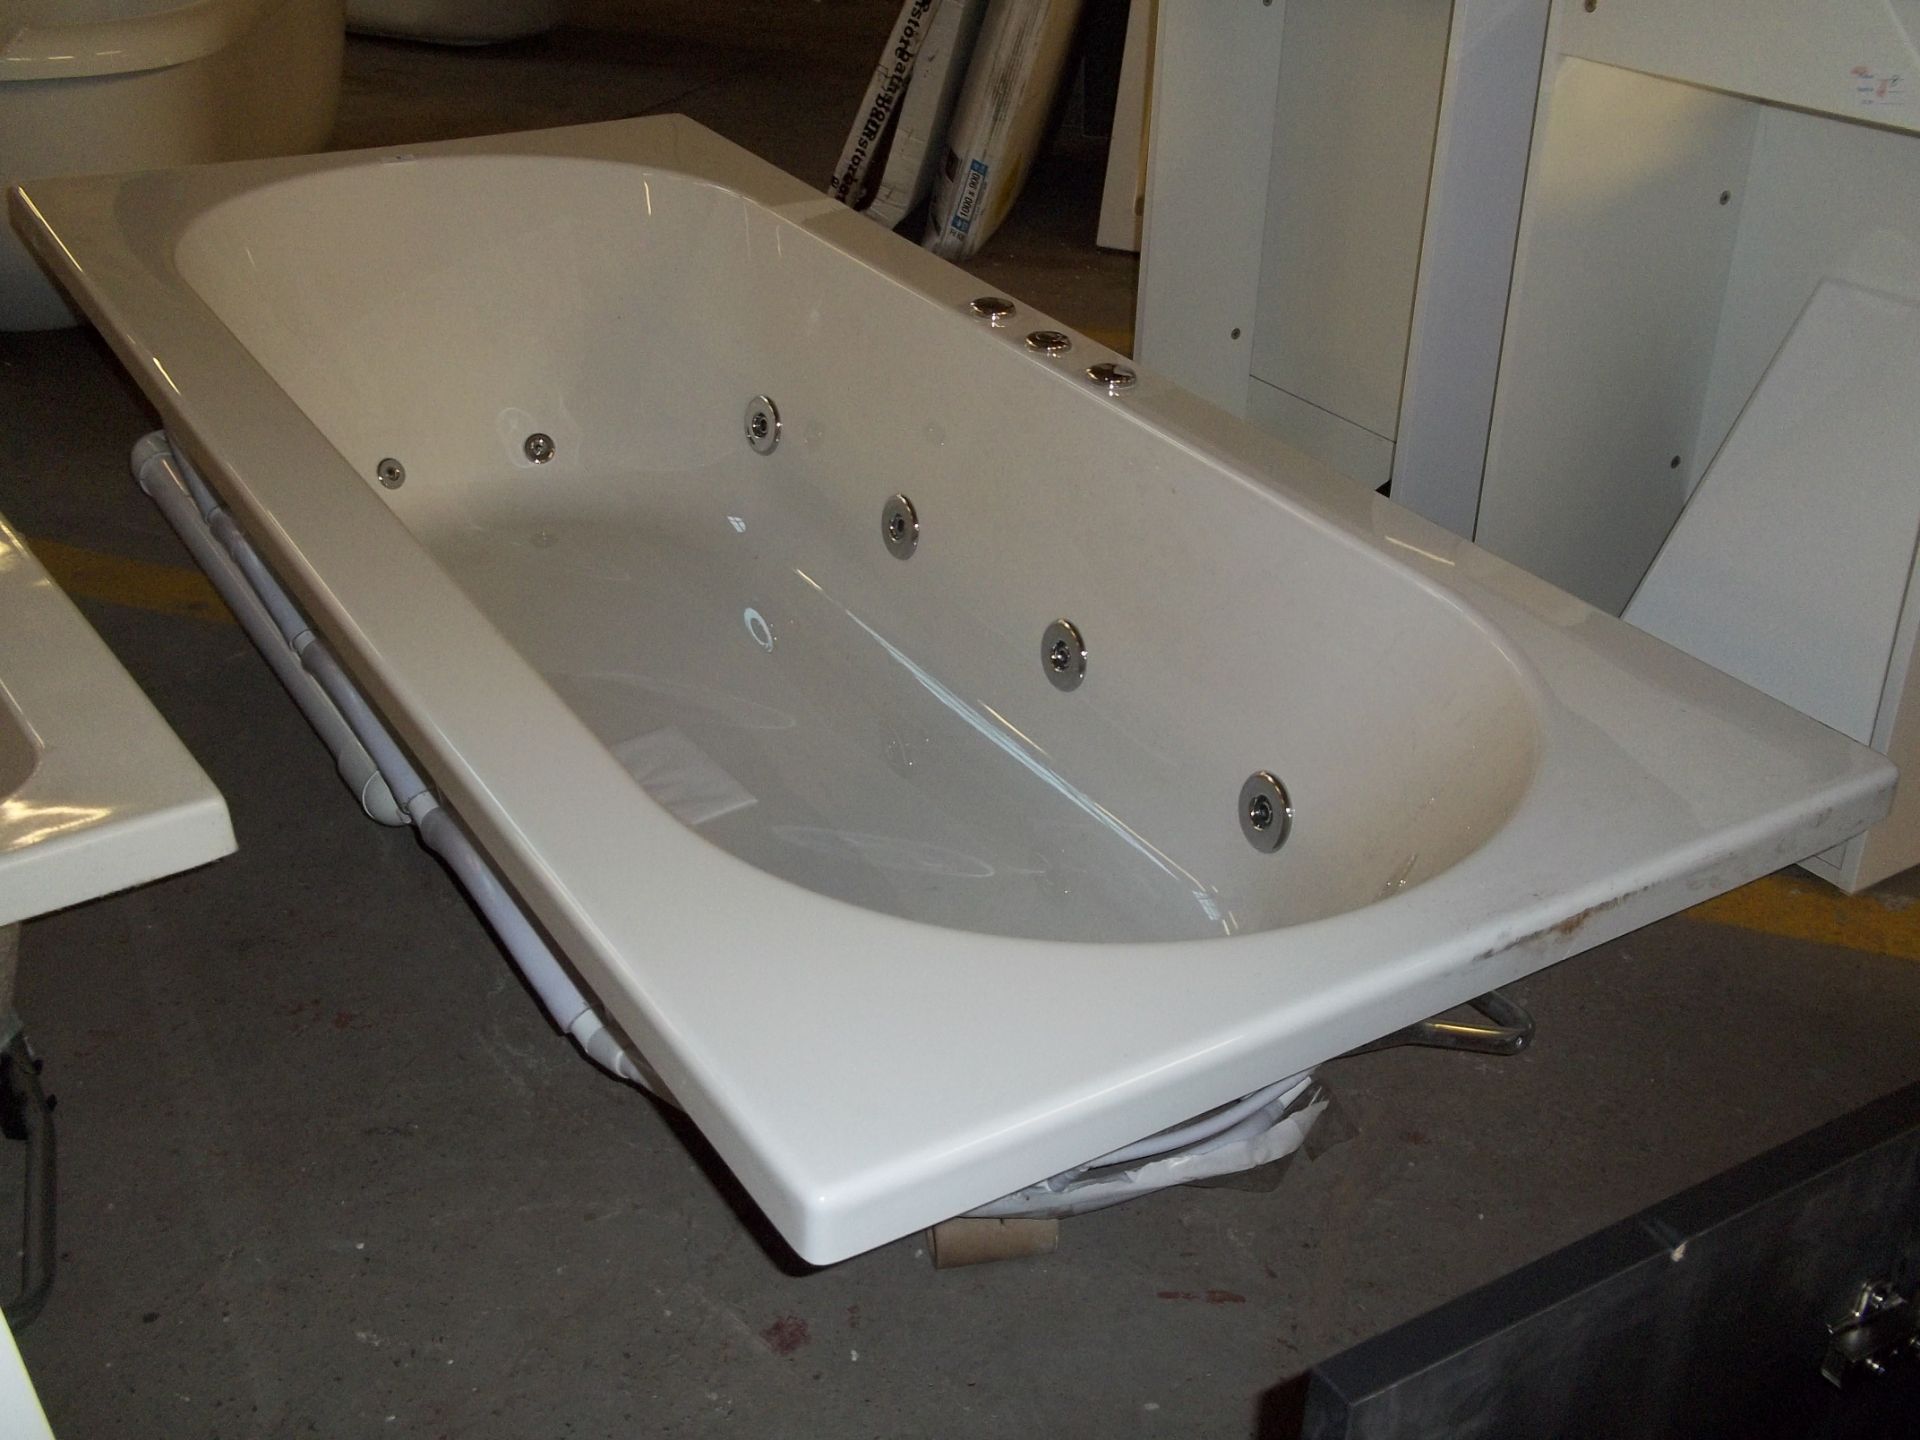 1800x800 multi-jet whirlpool double ende - Image 4 of 4